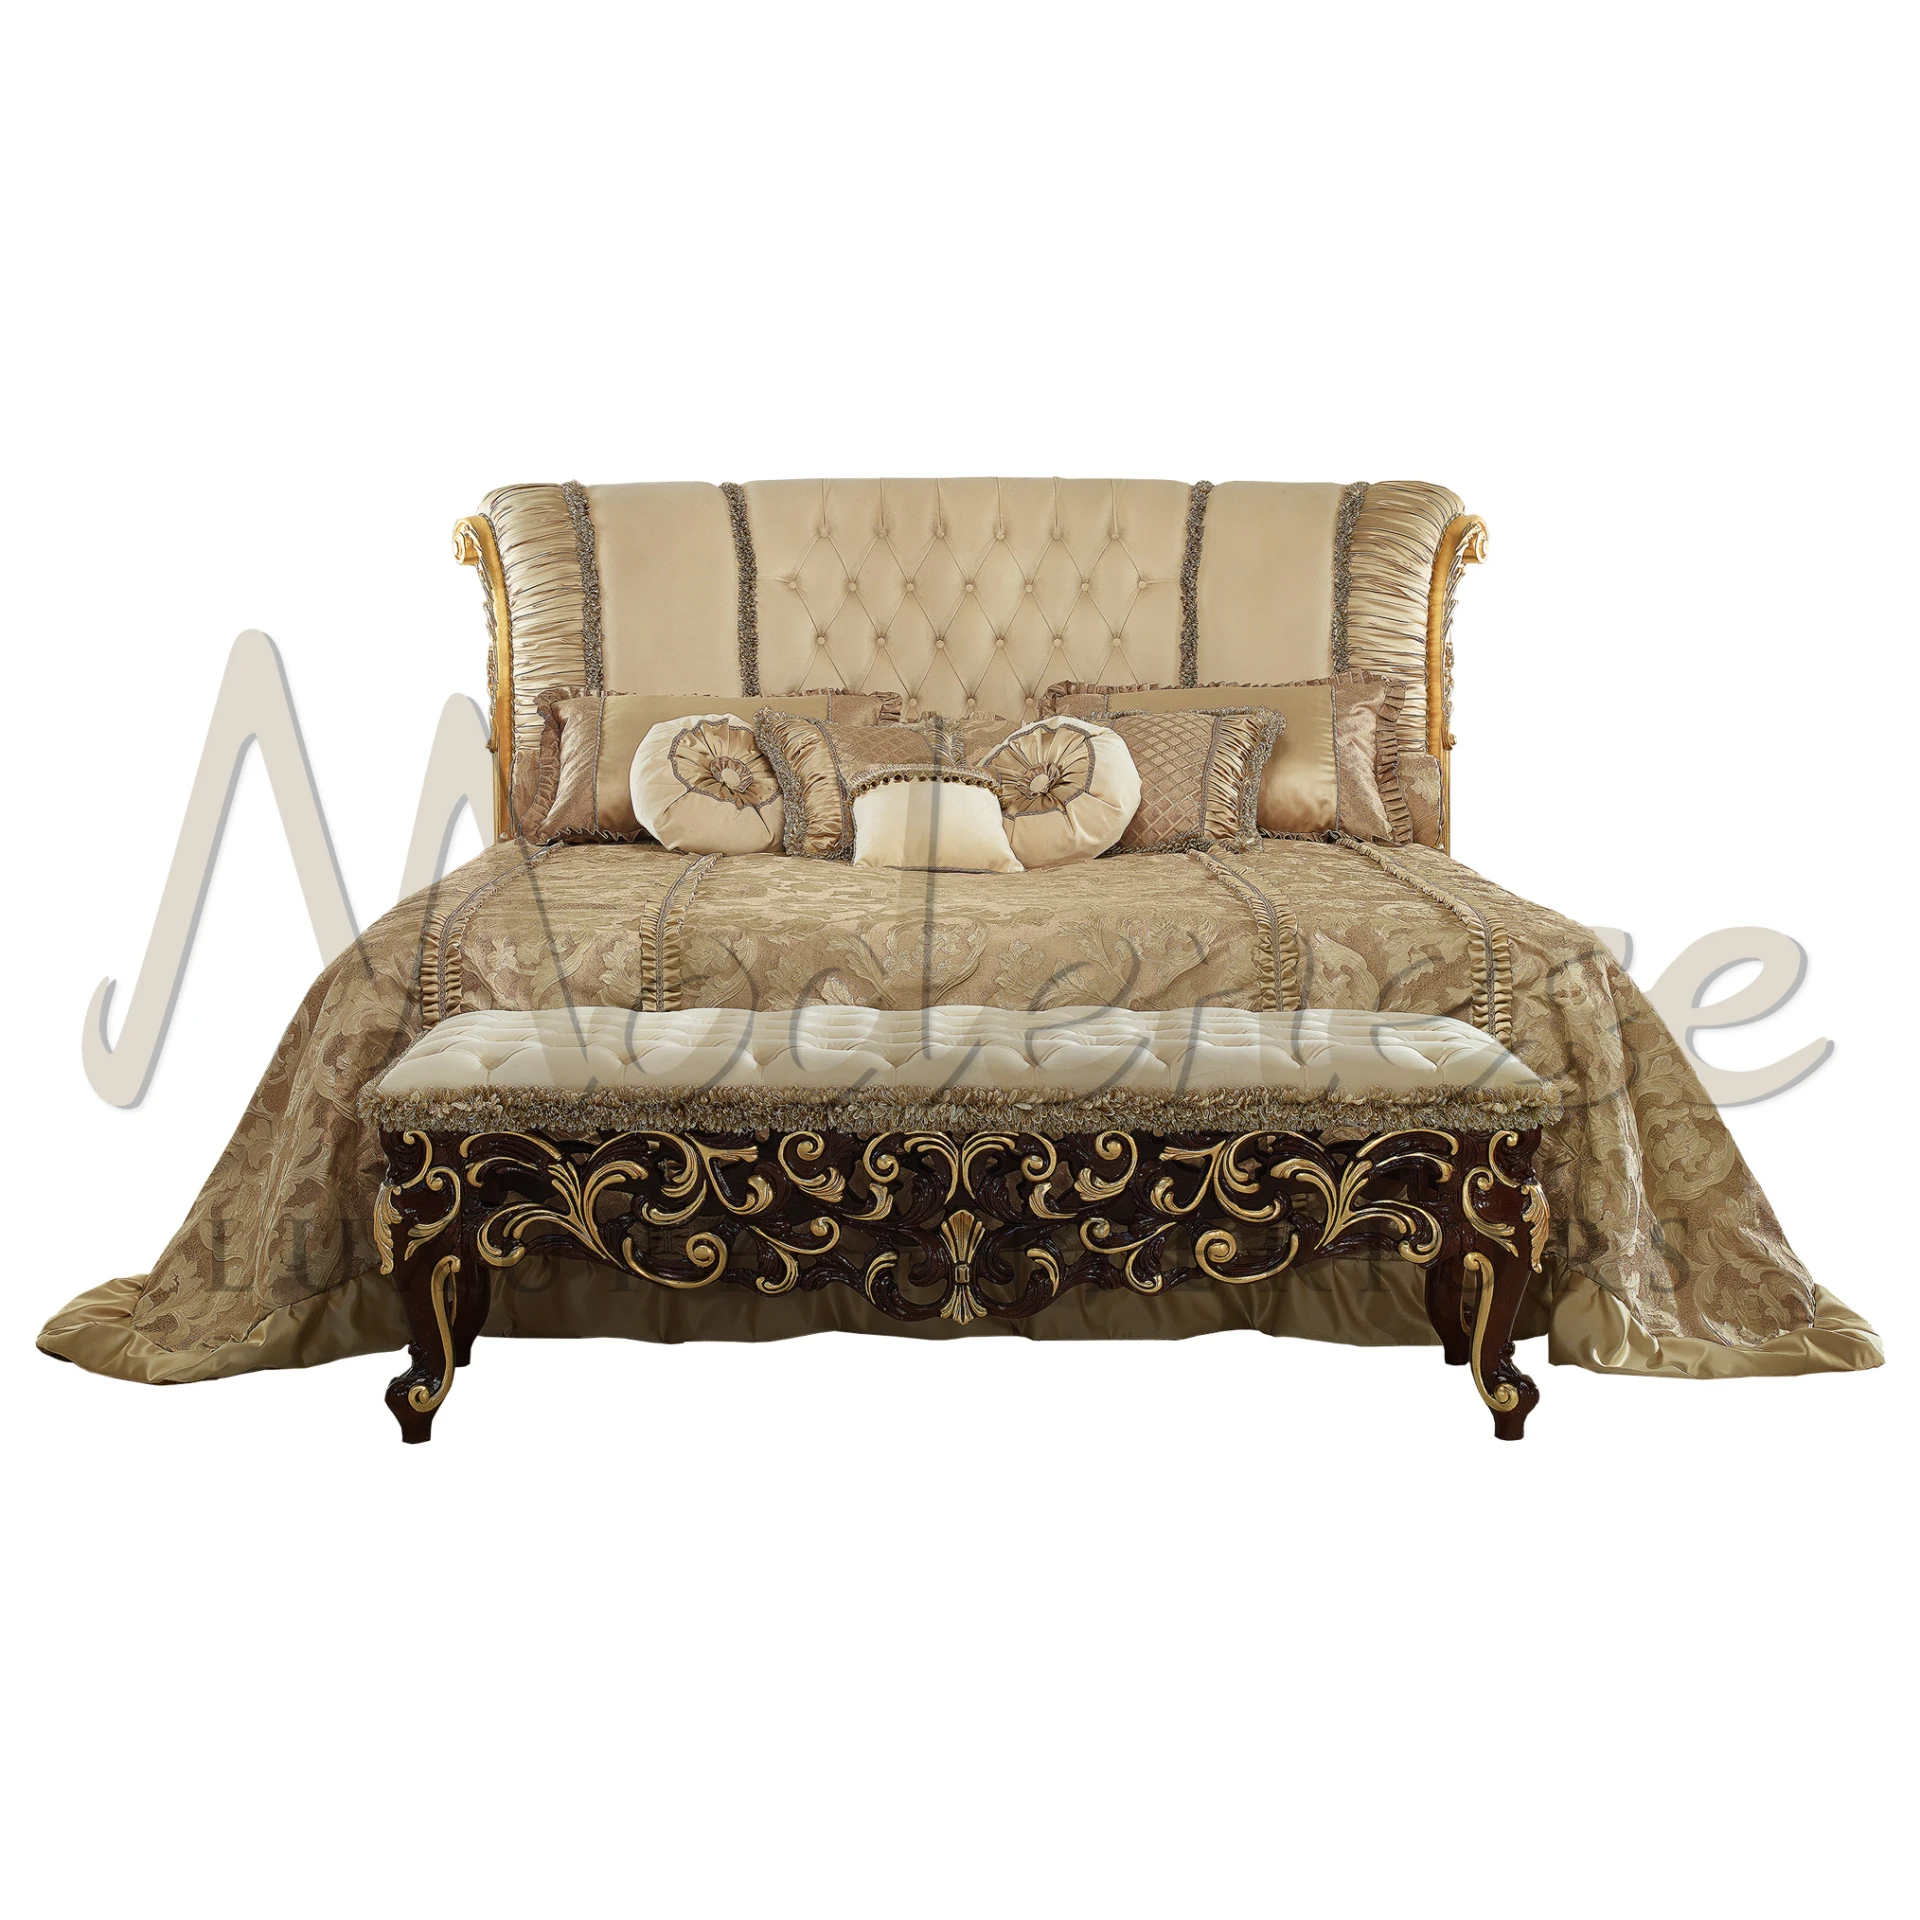 The daybed features a high, tufted backrest in a creamy beige upholstery, adorned with diamond-patterned buttoning that adds texture and elegance.  The piece rests on elegantly turned wooden legs.